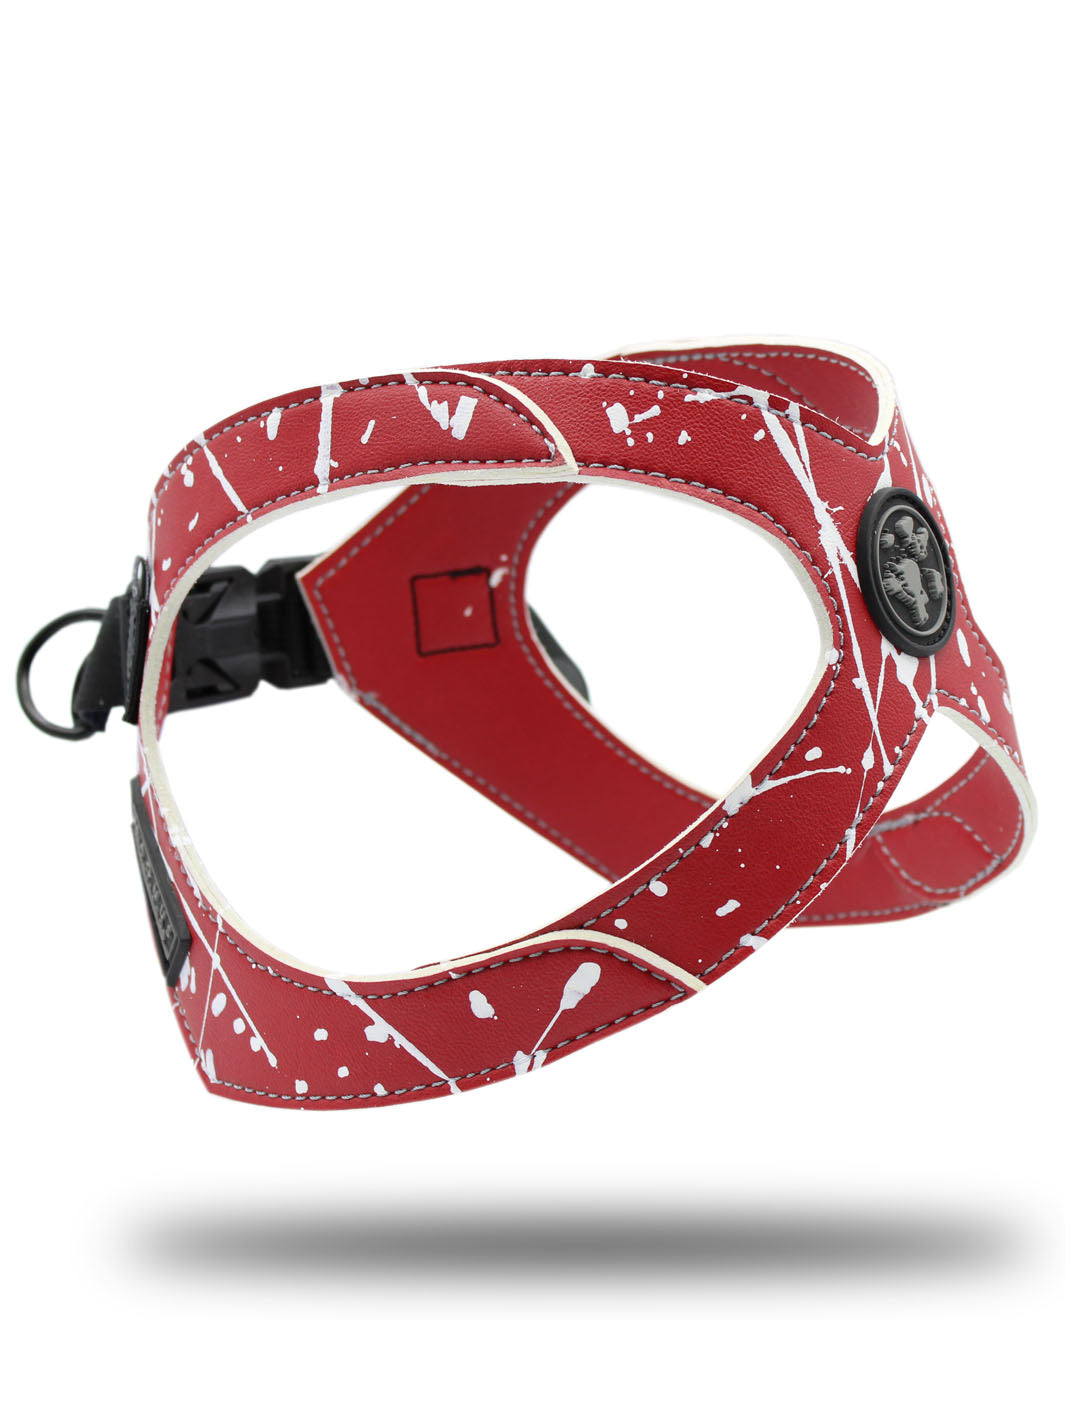 Bright red and white patterned french bulldog harness by MAGNUS Canis floats above a white surface.